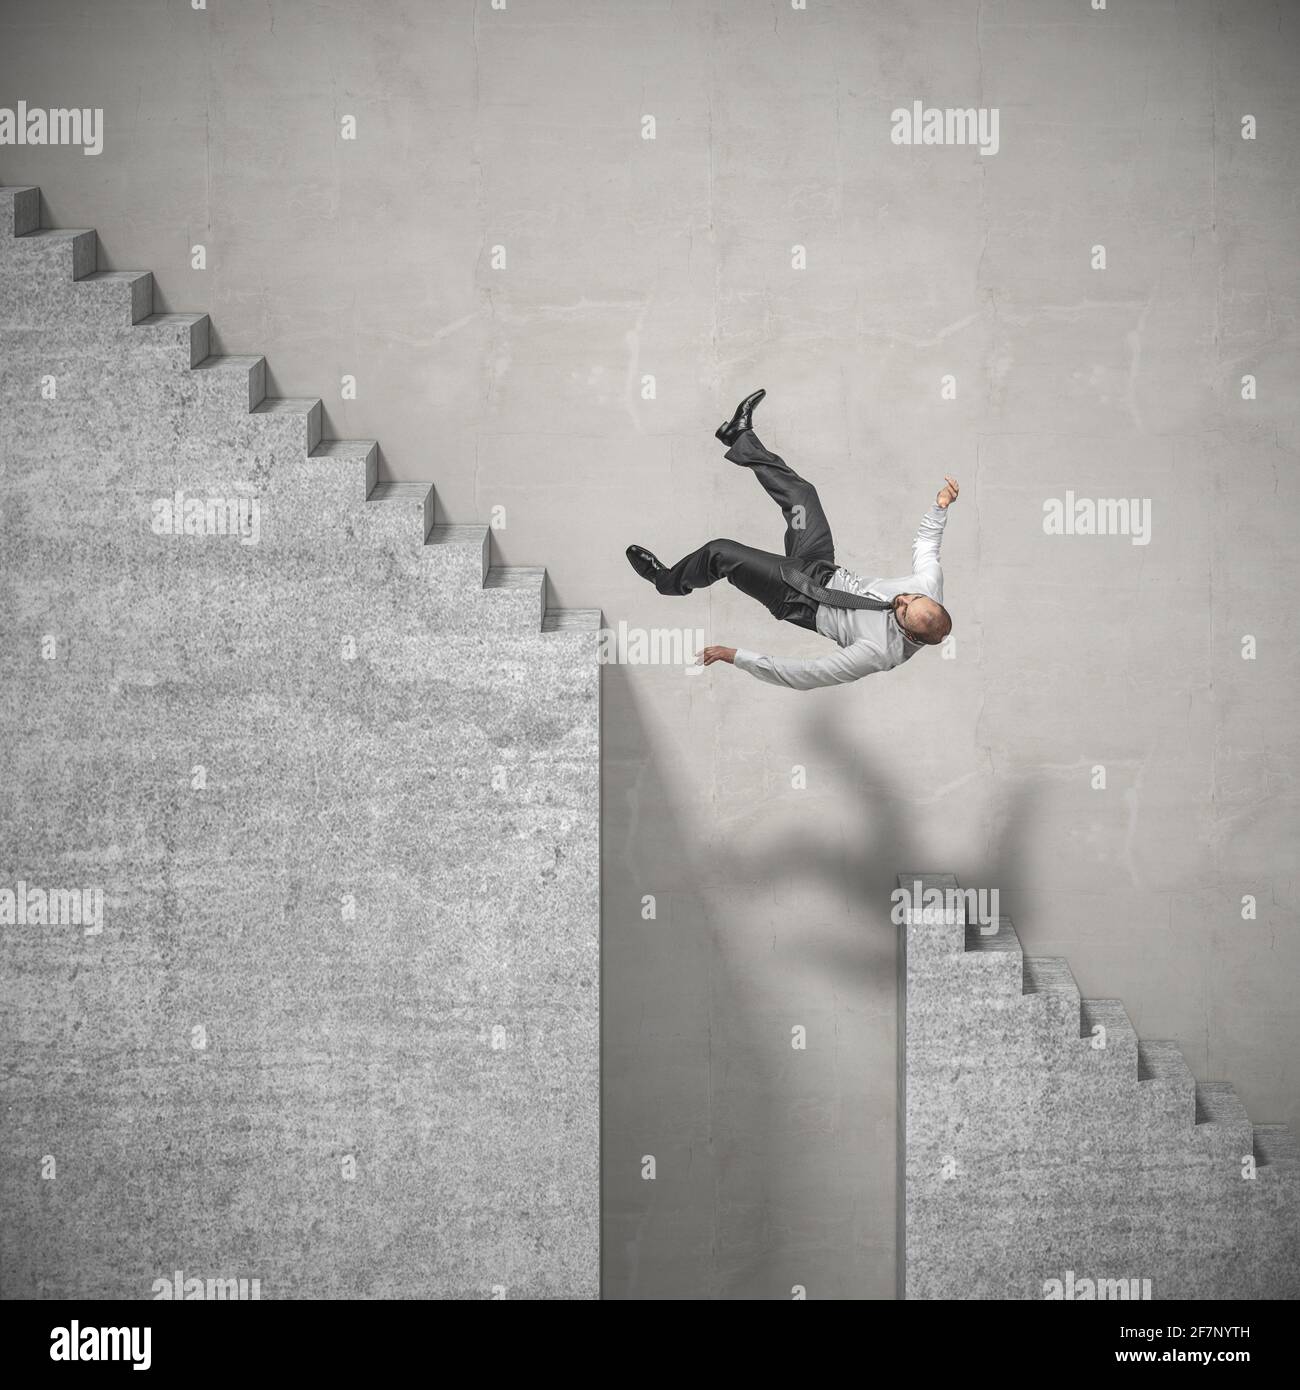 businessman climbs the stairs and falls in a dangerous spot. concept of difficulties at work and challenges. Stock Photo